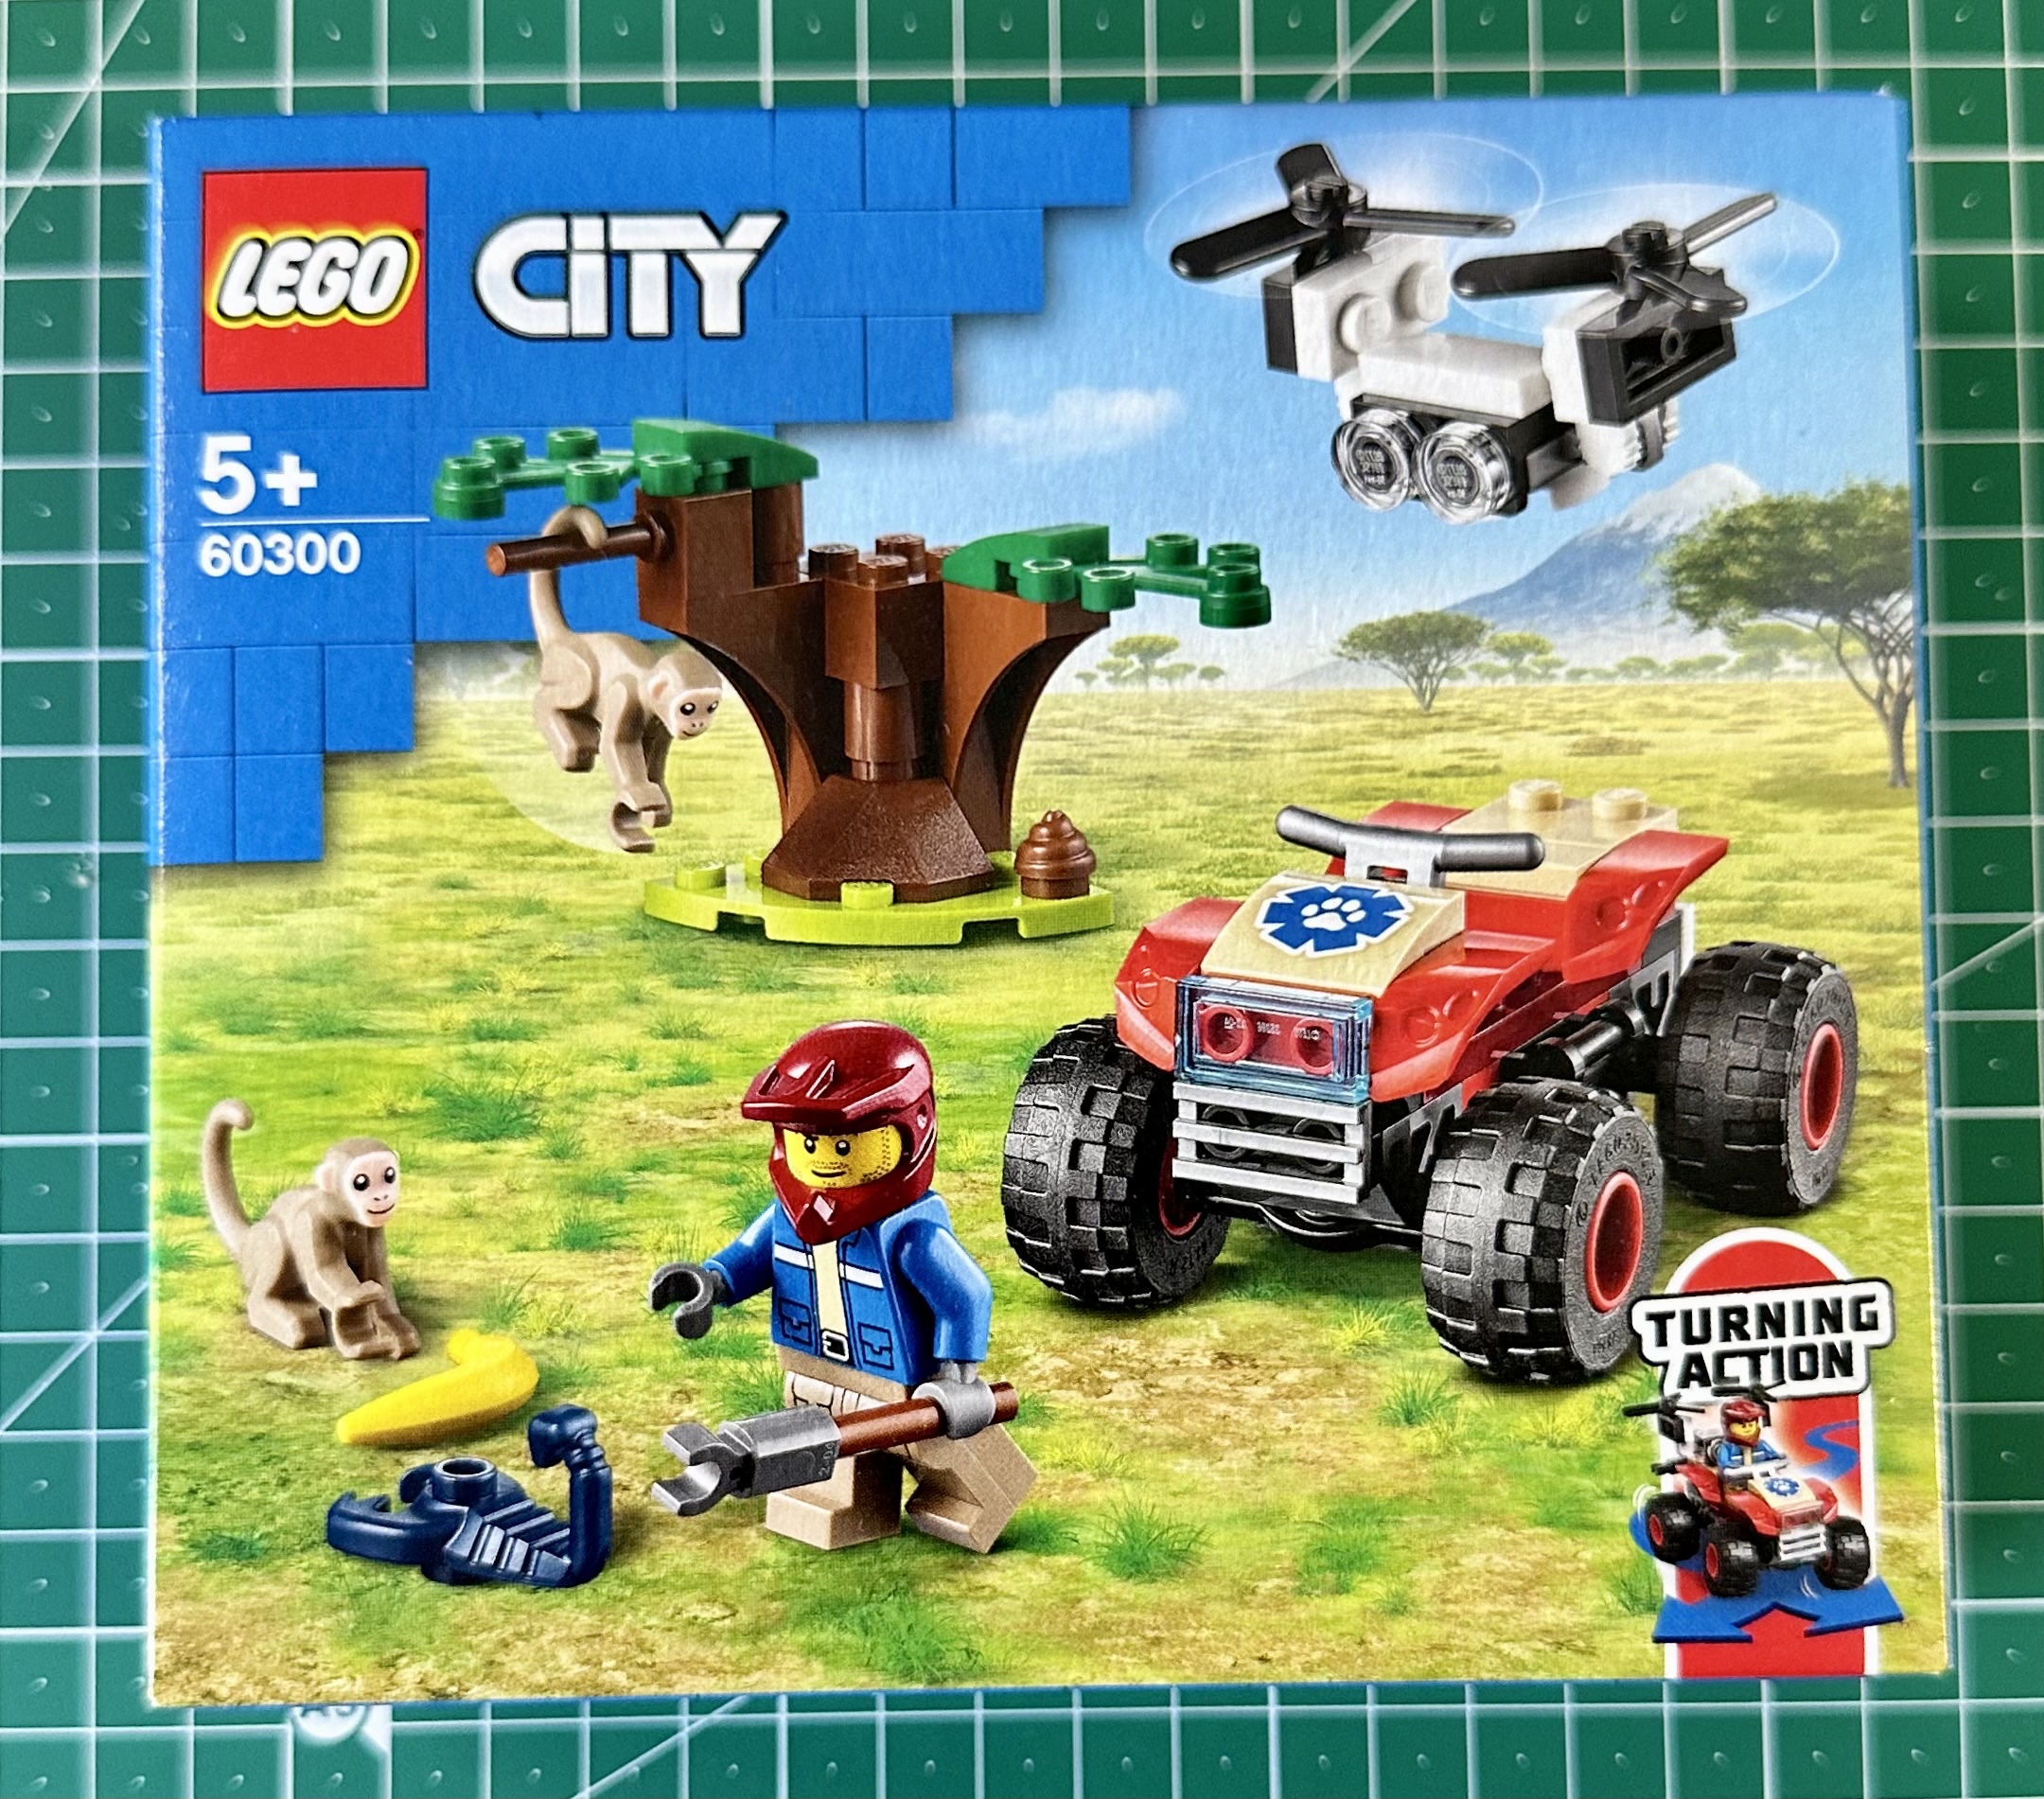 Box for LEGO City set 60300. Box depicts a 4WD vehicle, a flying drone, a minifigure, a tree, two monkeys, and a scorpion.